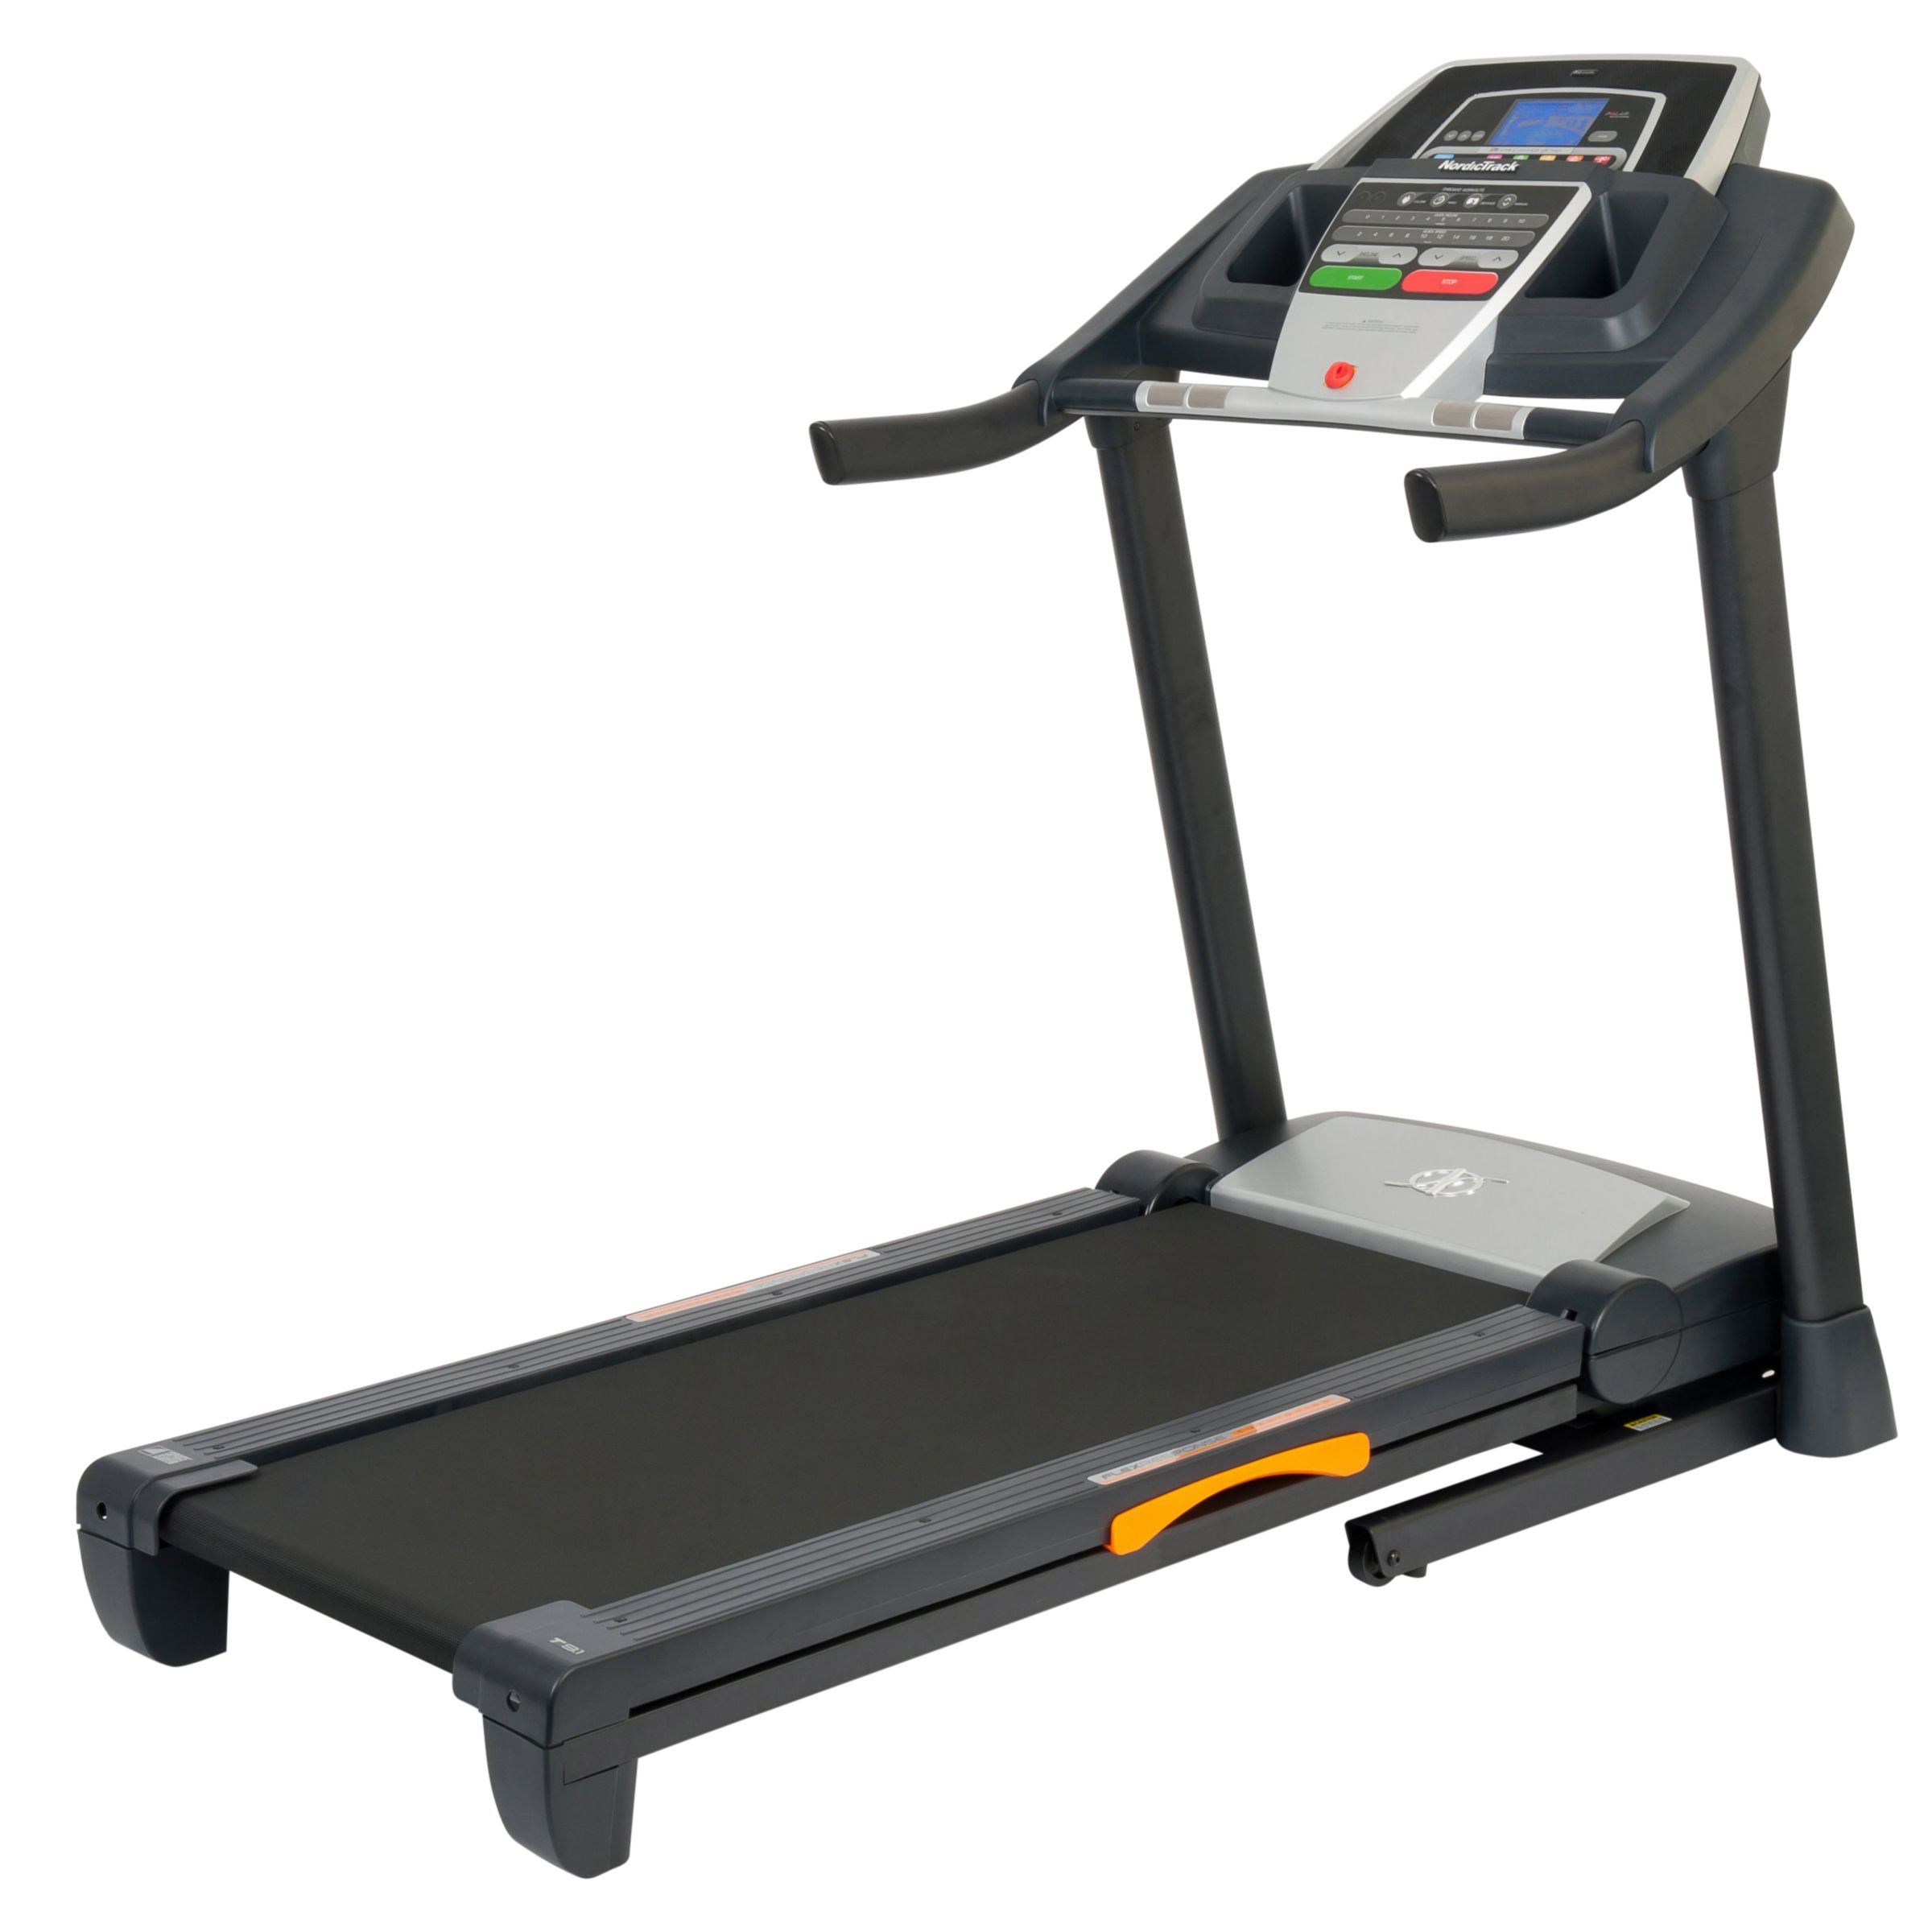 Nordic Track NordicTrack T9.1 Folding Treadmill with iFit Live